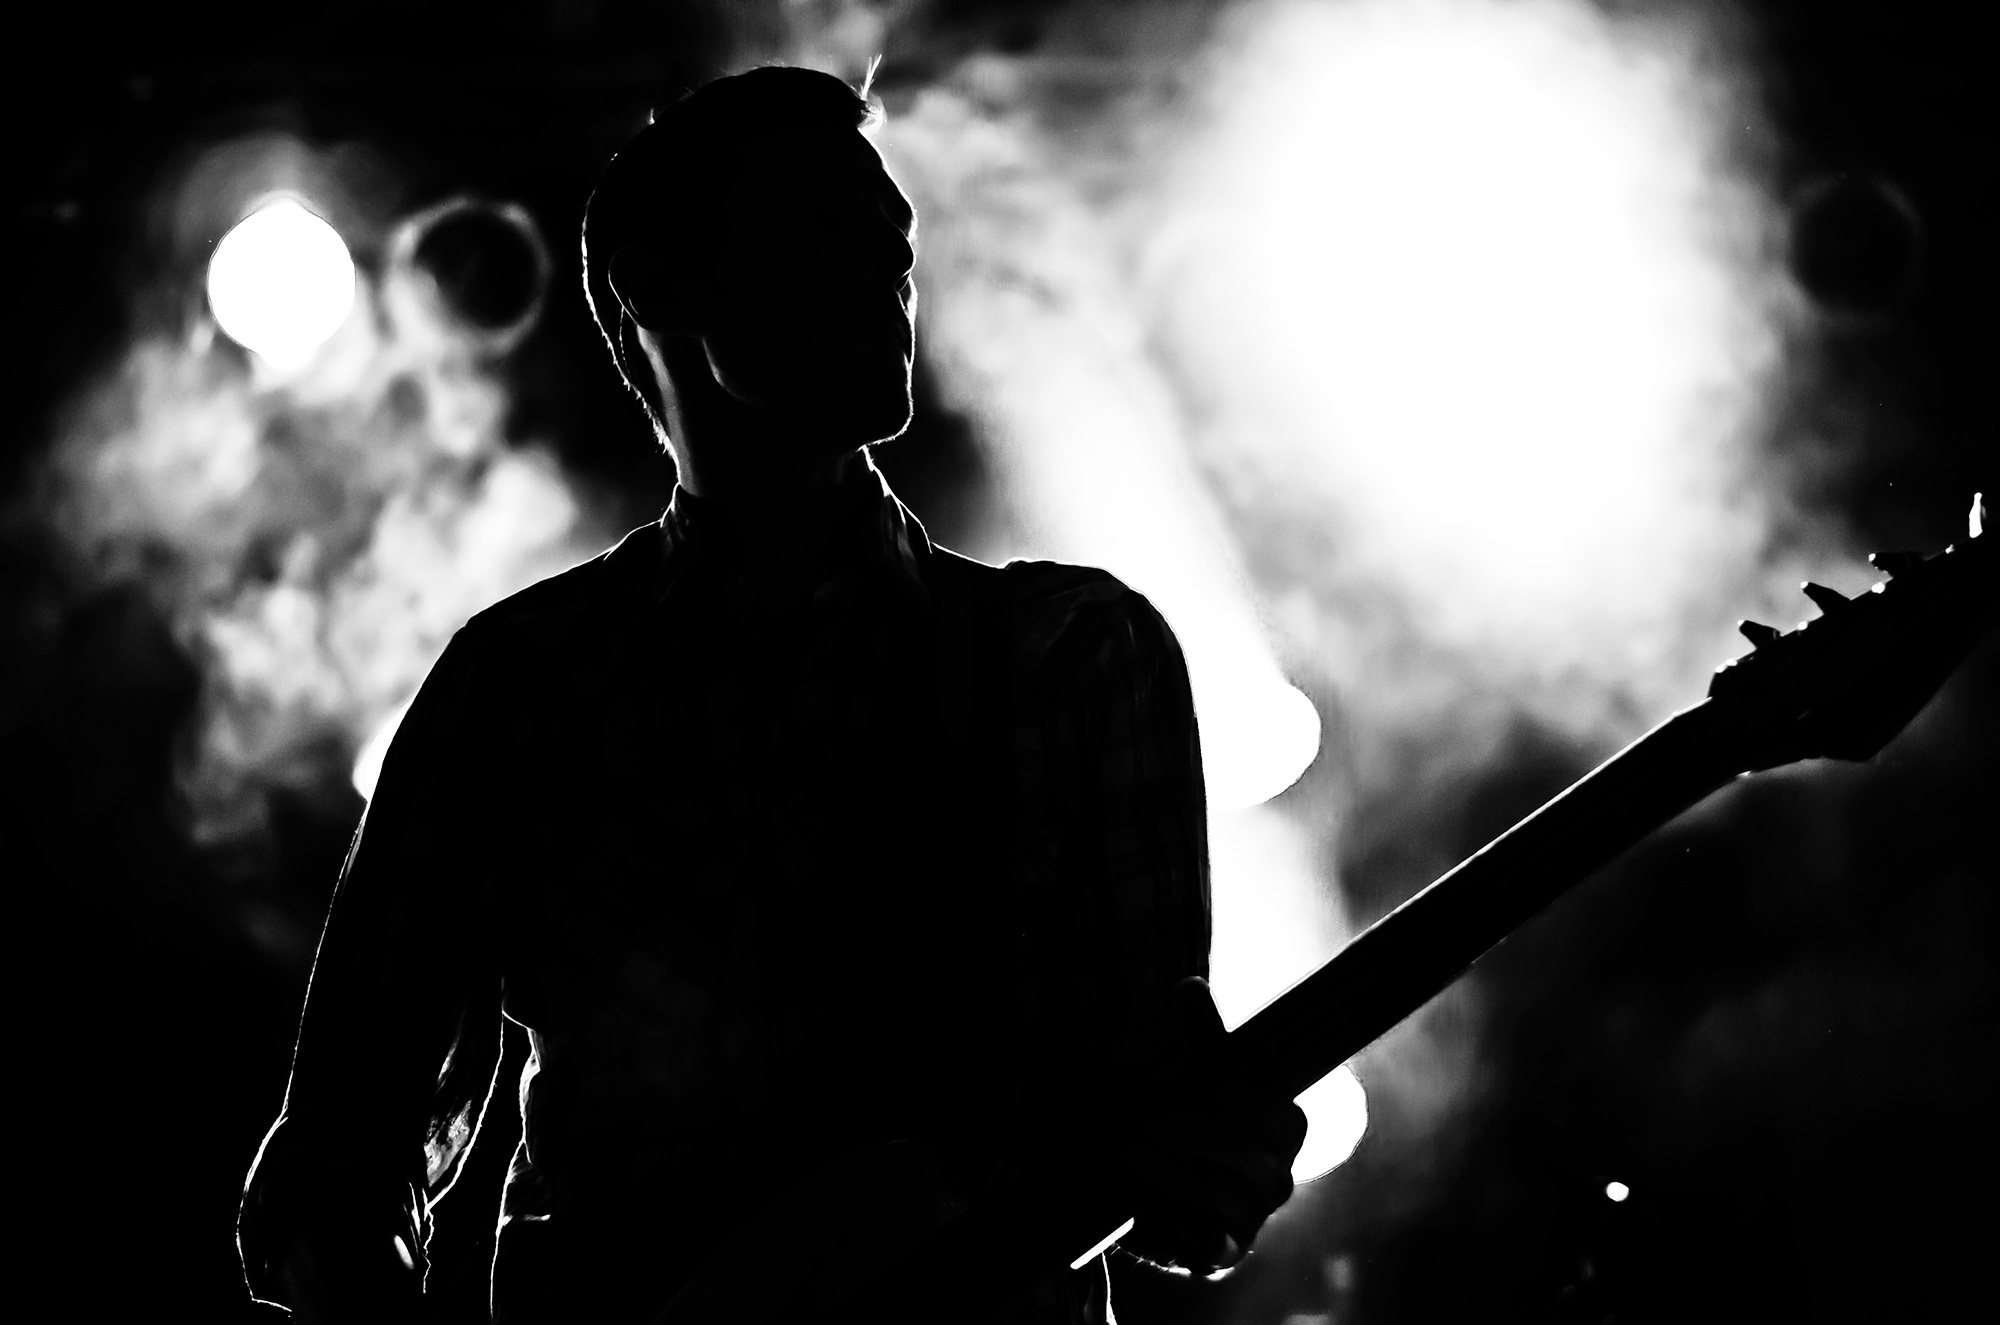 Bassist in the light